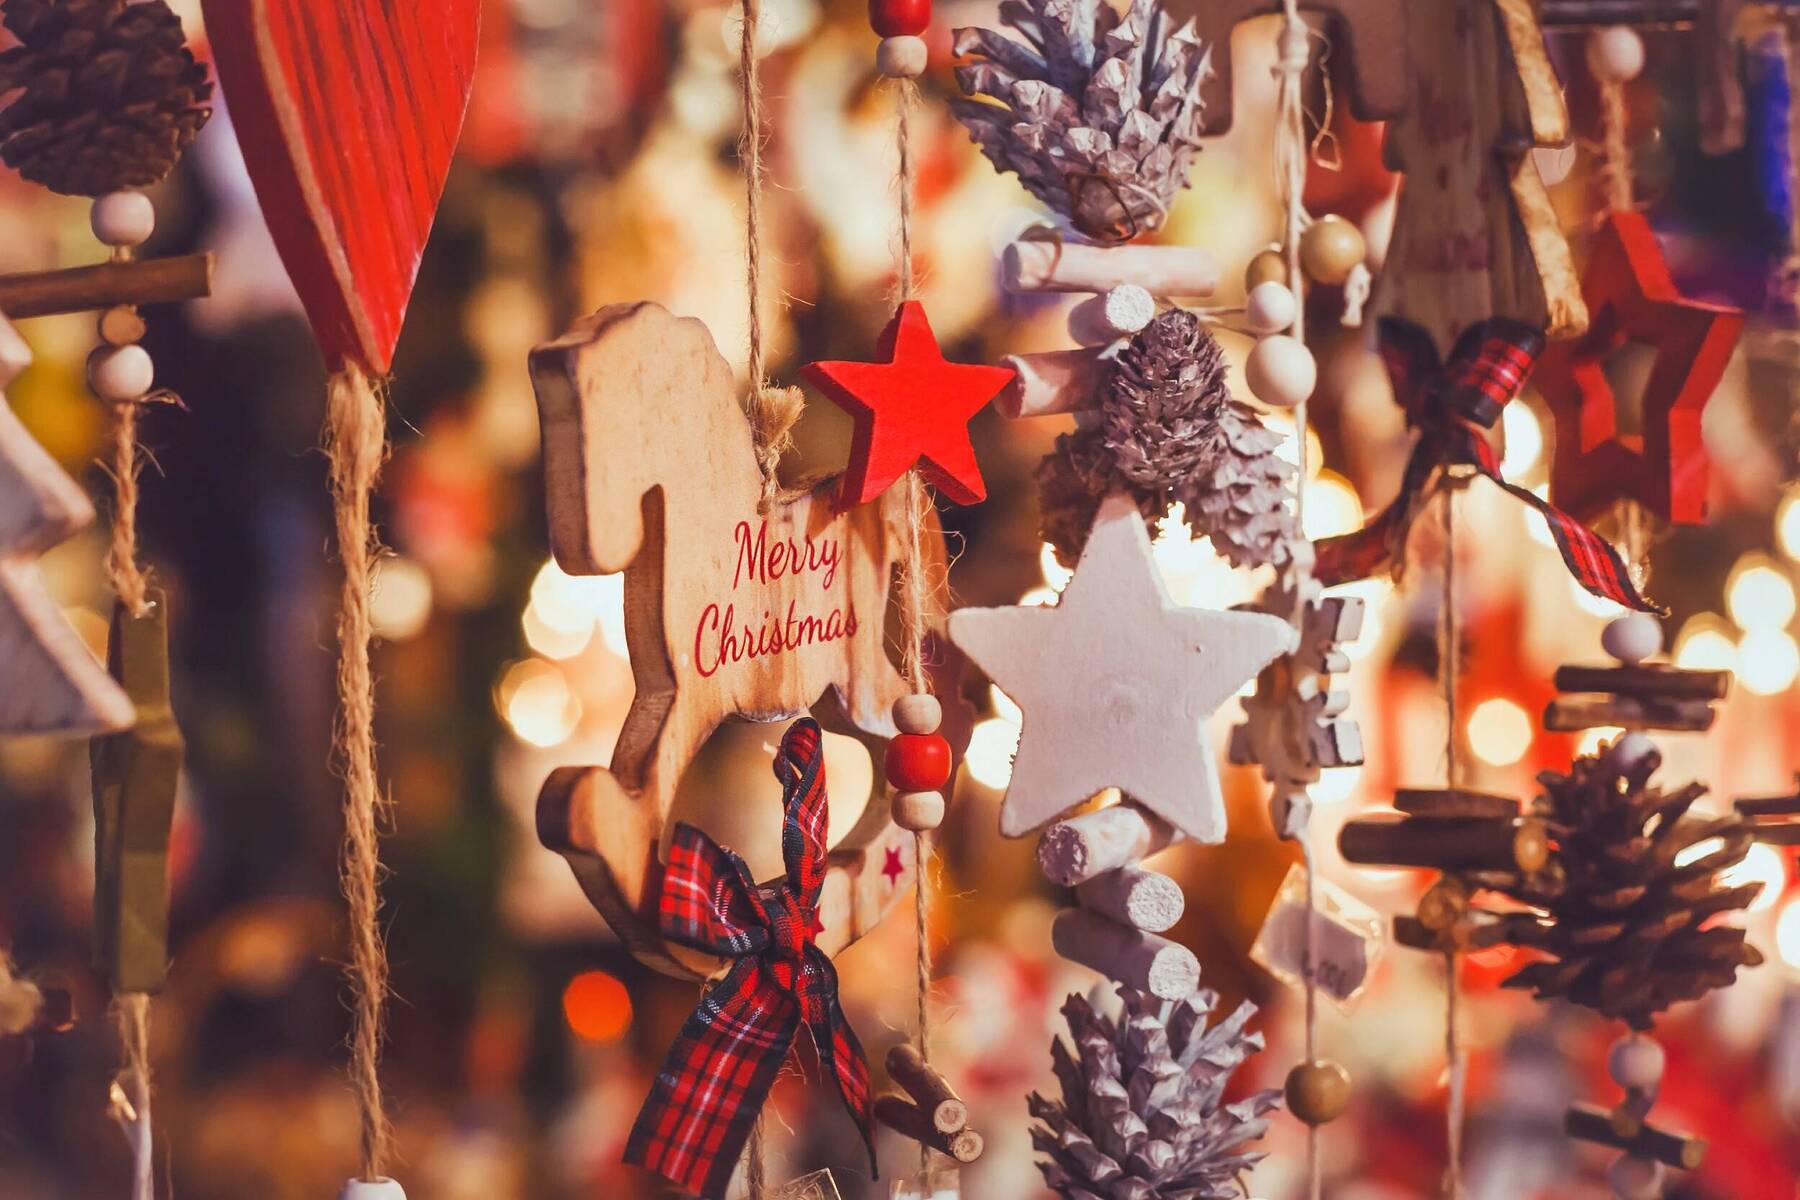 Europe’s Most Unusual Christmas Markets